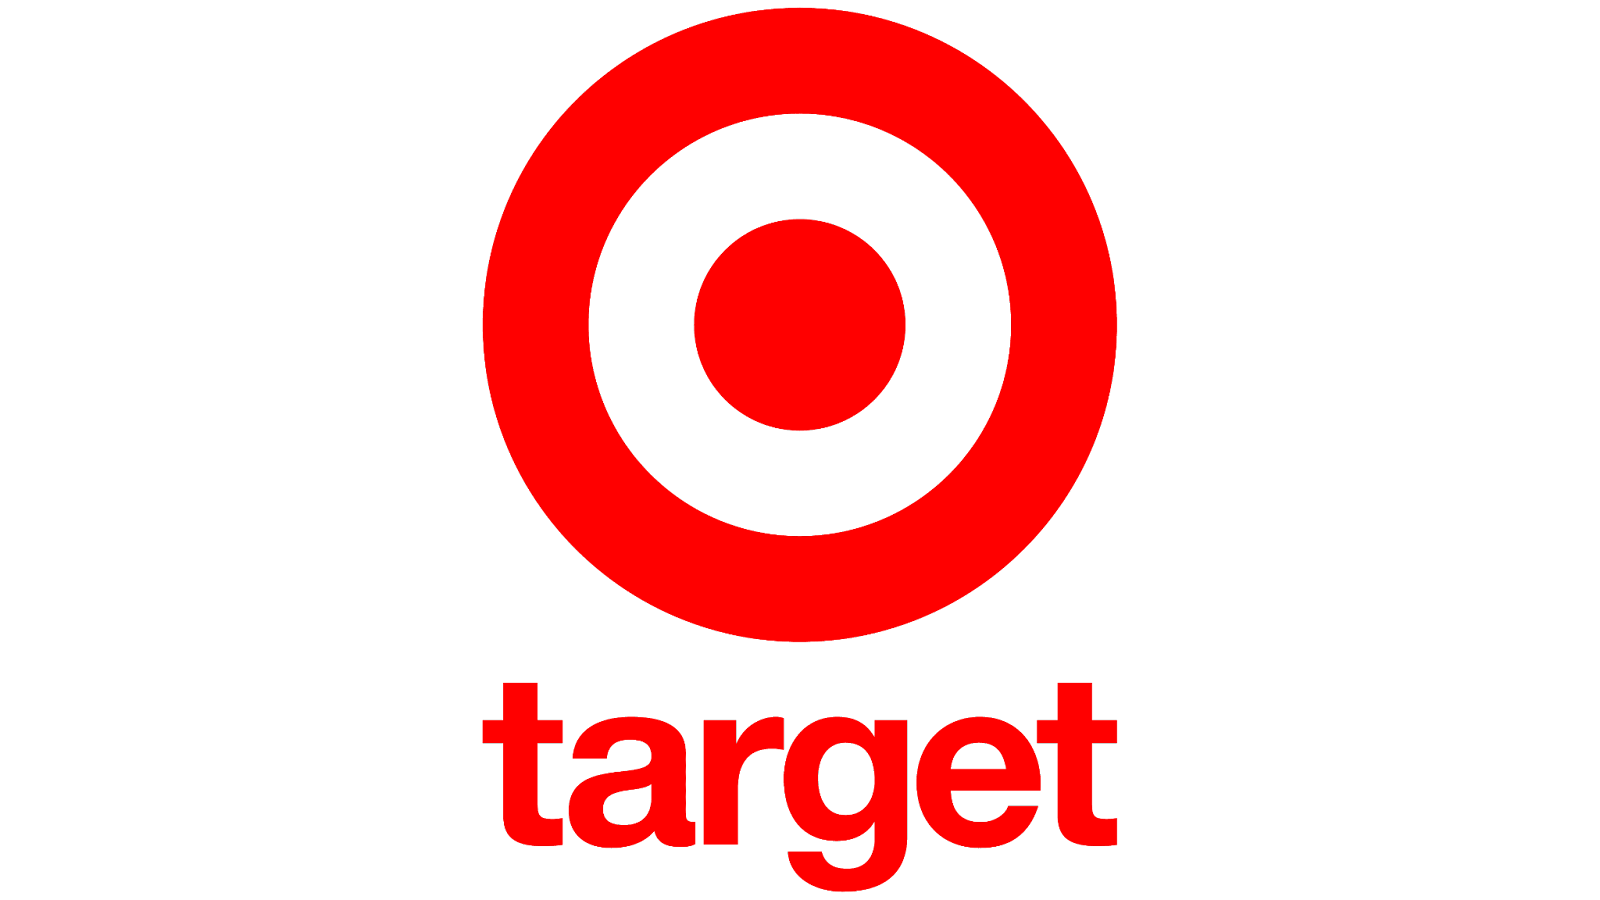 The logo for Target